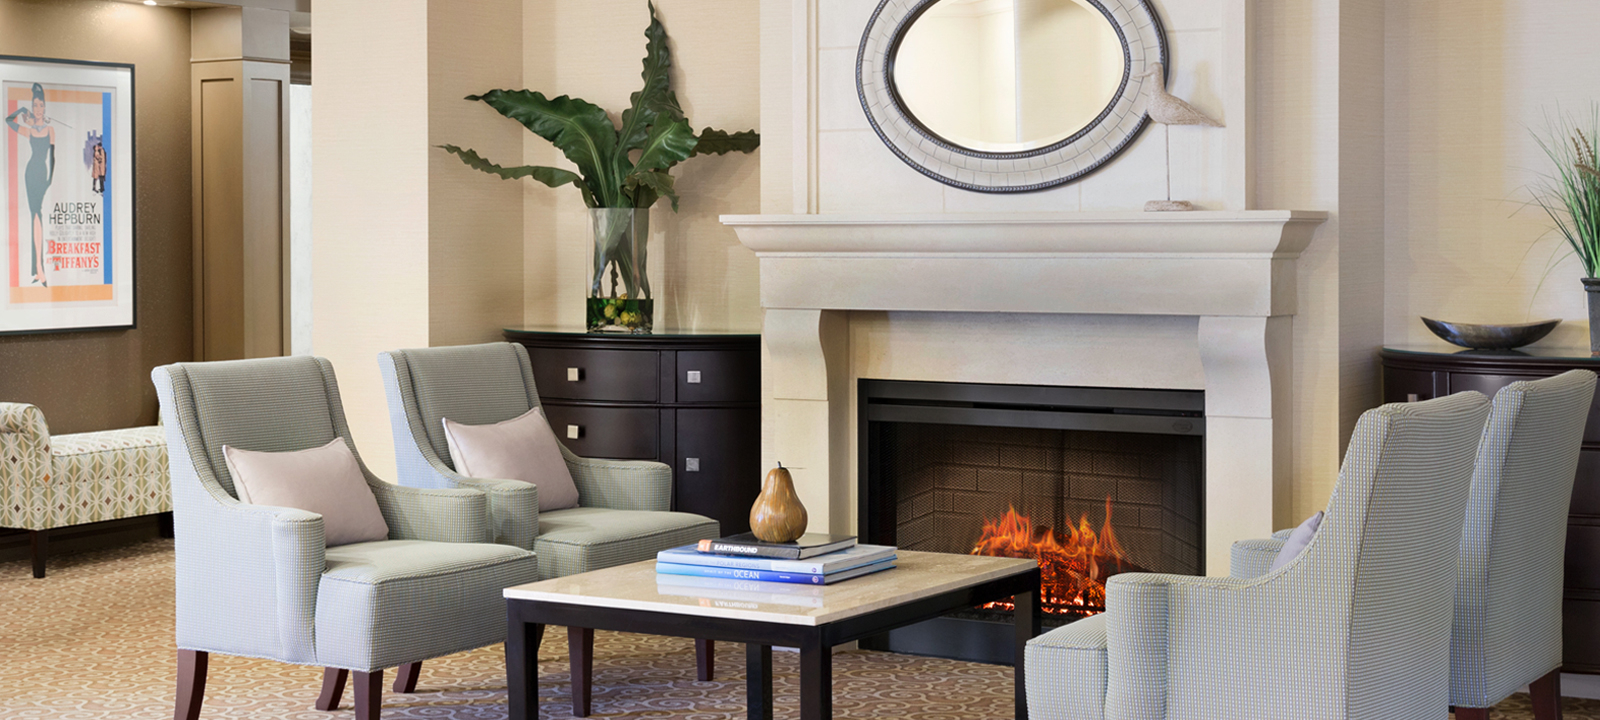 Amica Whitby senior living residence waiting area with fireplace and couches.